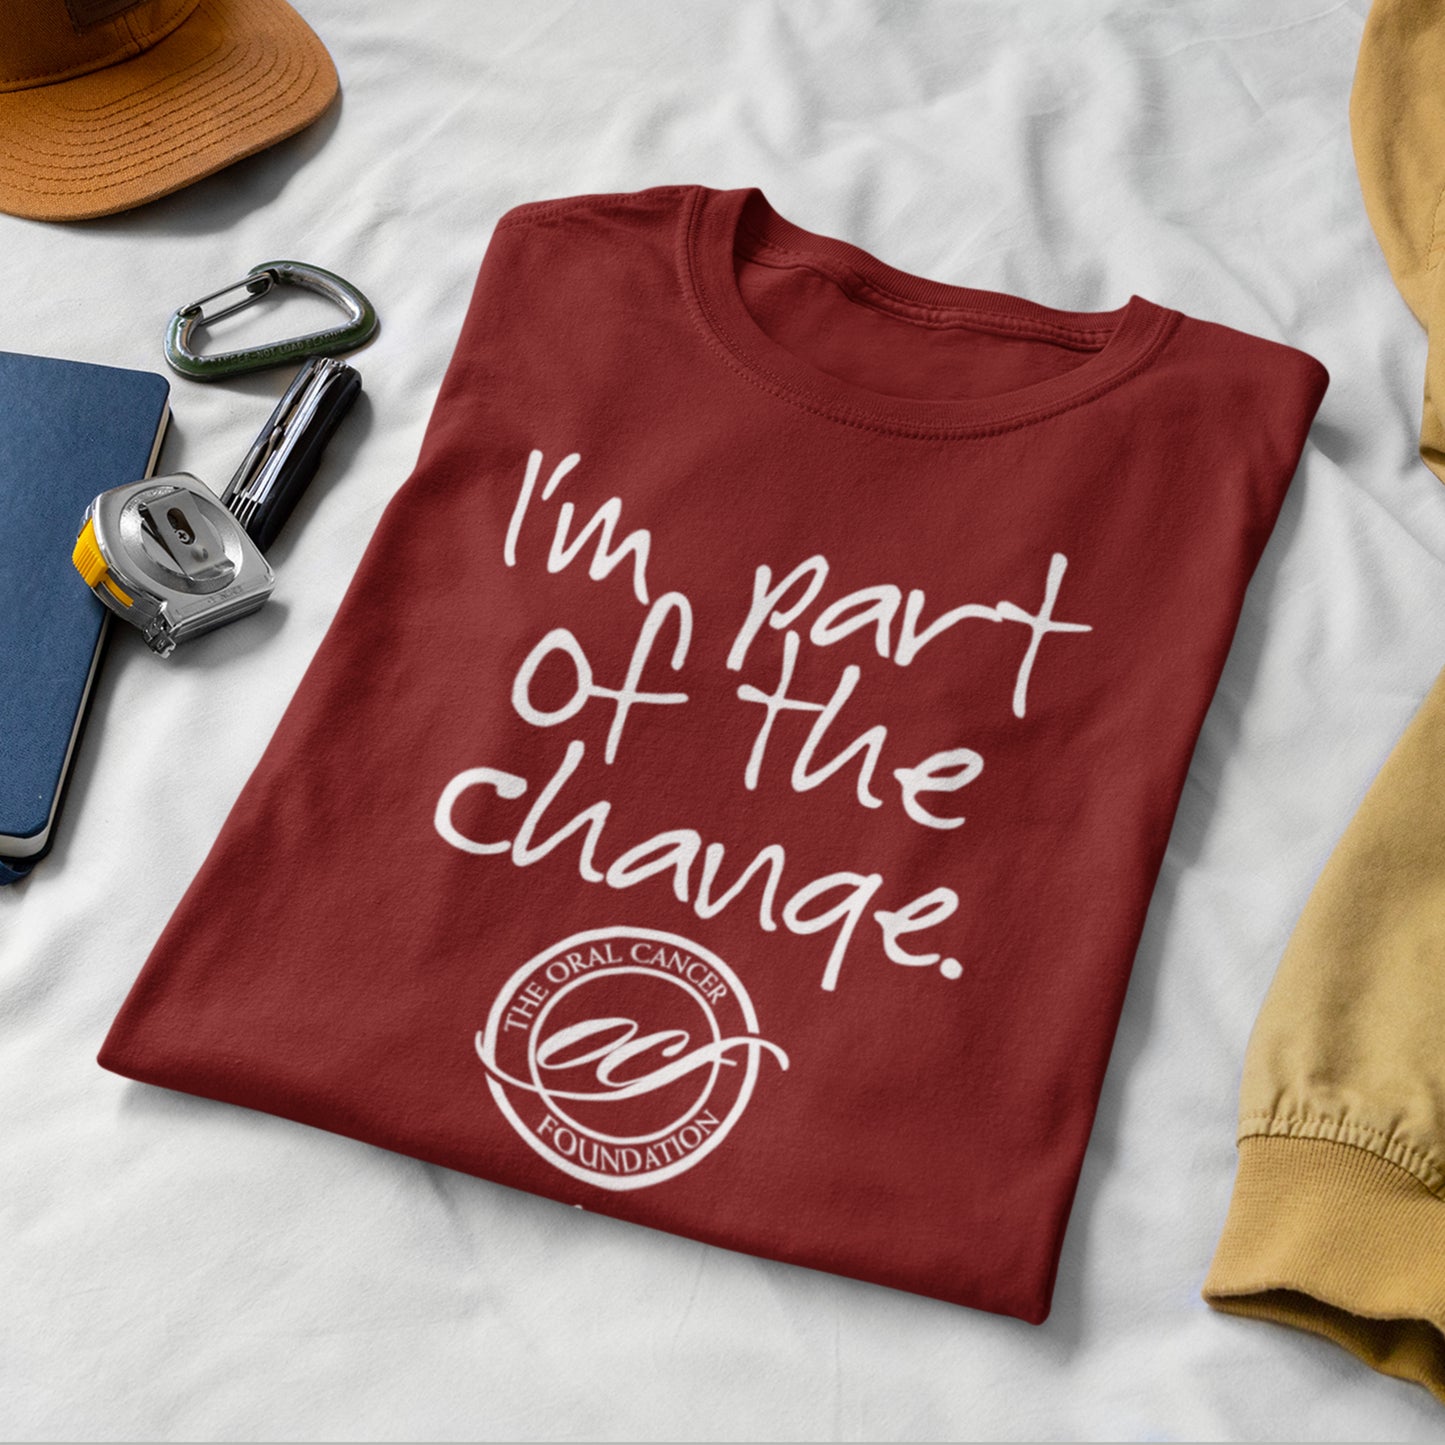 RDH I'm Part of the Change T-Shirt